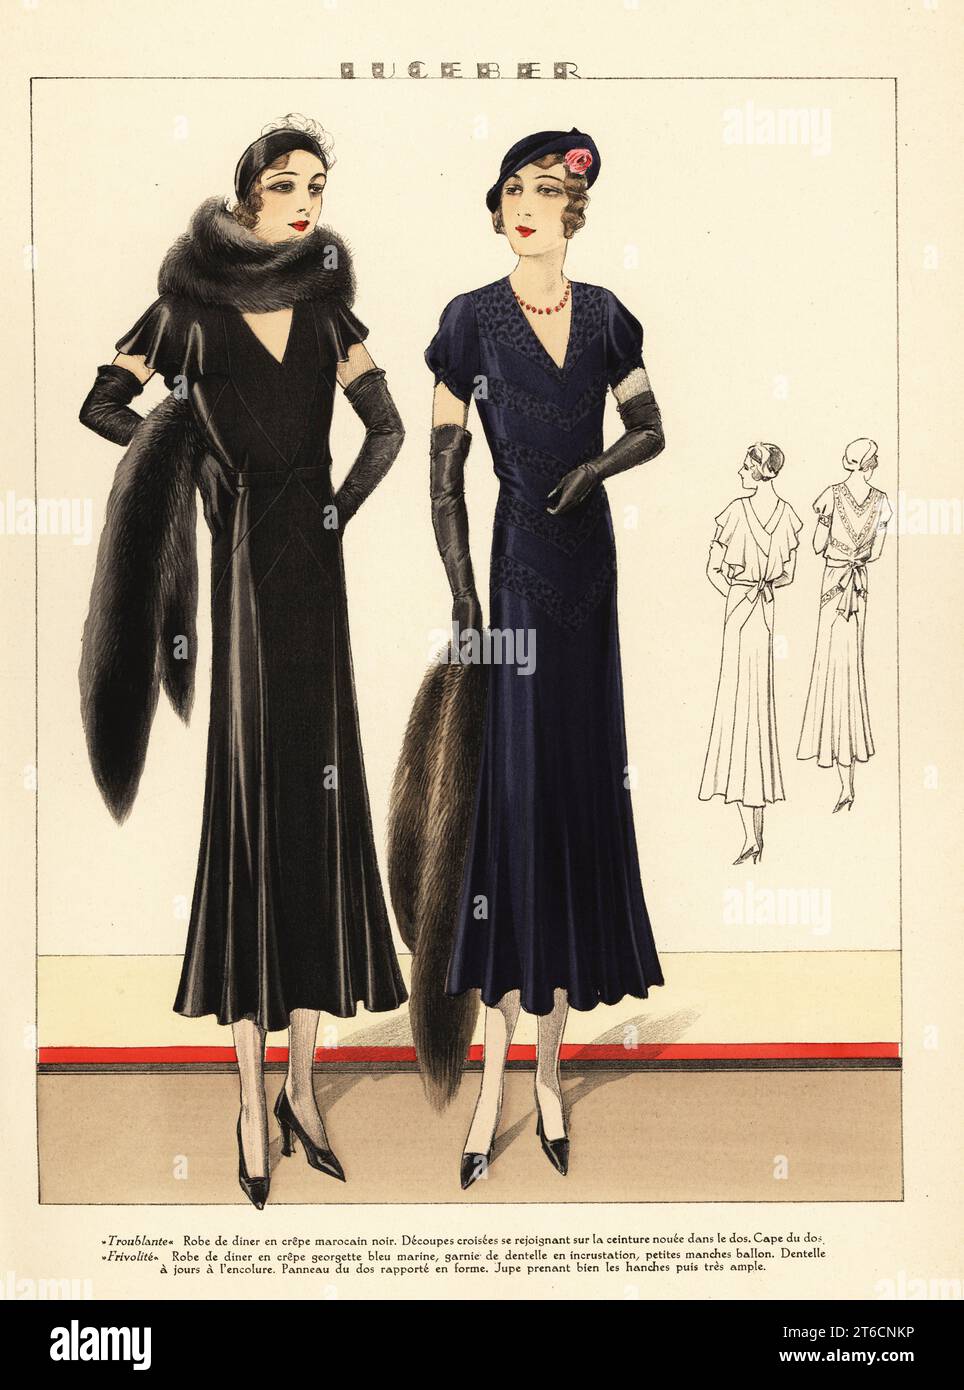 Woman in Troublante dinner dress in black Moroccan crepe with fur stole. Woman in Frivolite dinner dress in navy blue crepe georgette. Marcel wave bob hairstyles and cloche hats. Fashion designs by Luceber. Handcoloured pochoir lithograph from La Grande Couture, Creations pour la Femme Mondaine, Atelier Bachwitz, publisher of Chic Parisien, Vienna, September, 1931. Stock Photo